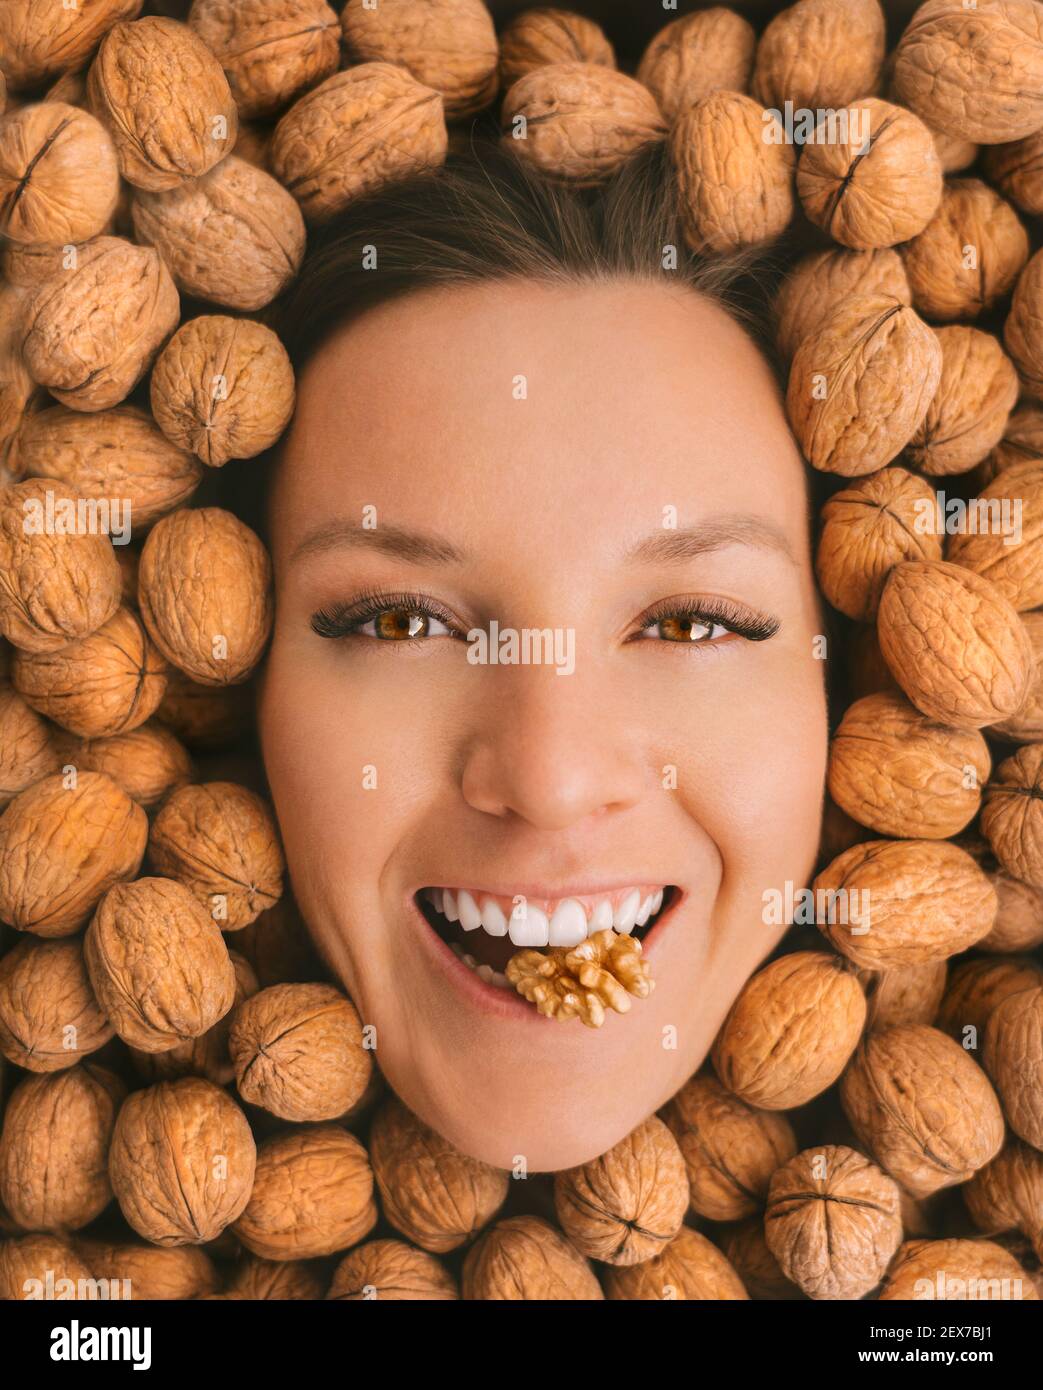 Happy smiling woman face on a walnuts background. Eating nuts. Healthy vegetarian protein and nutritious food. Woman with strong teeth and white smile Stock Photo